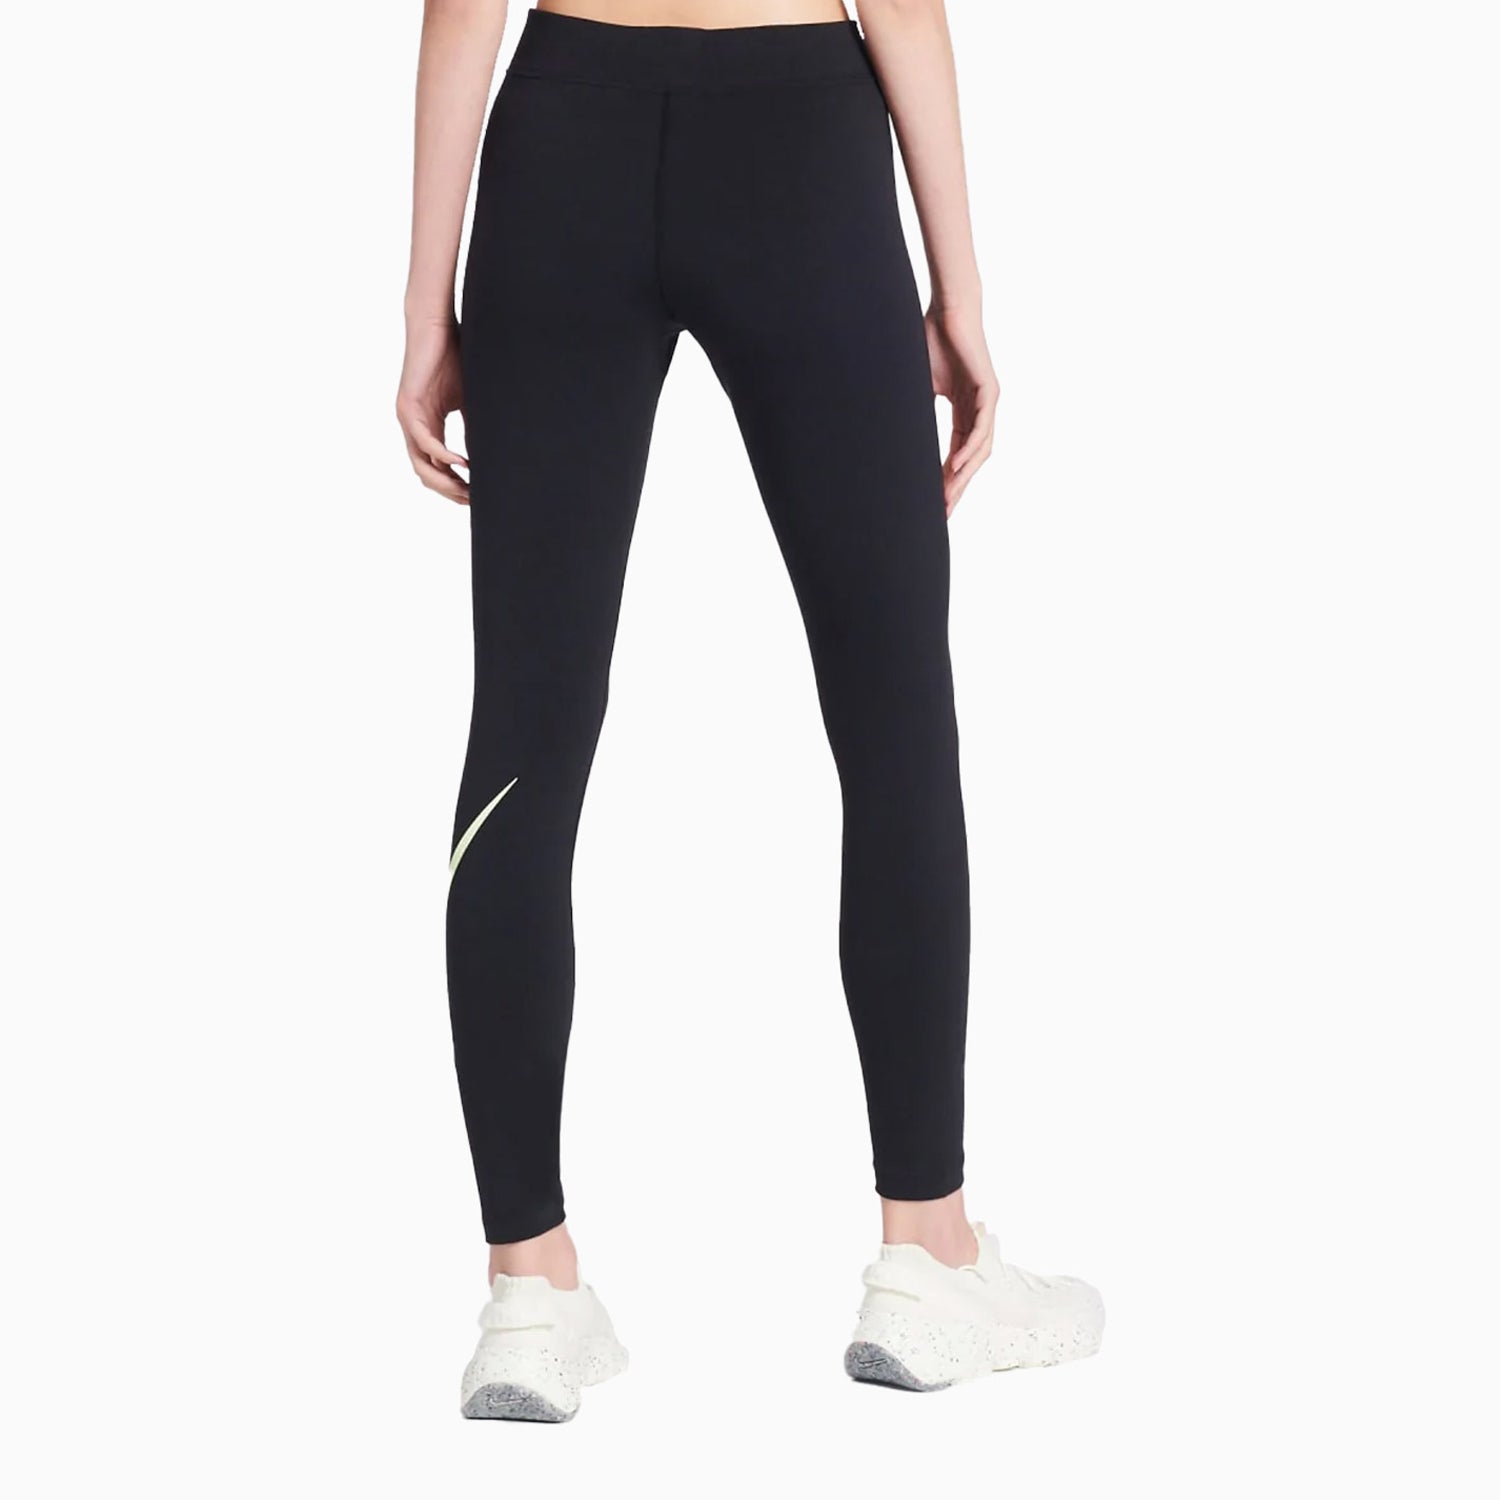 Nike Women's Sportswear Essential Legging - Color: Black Lime Ice - Tops and Bottoms USA -